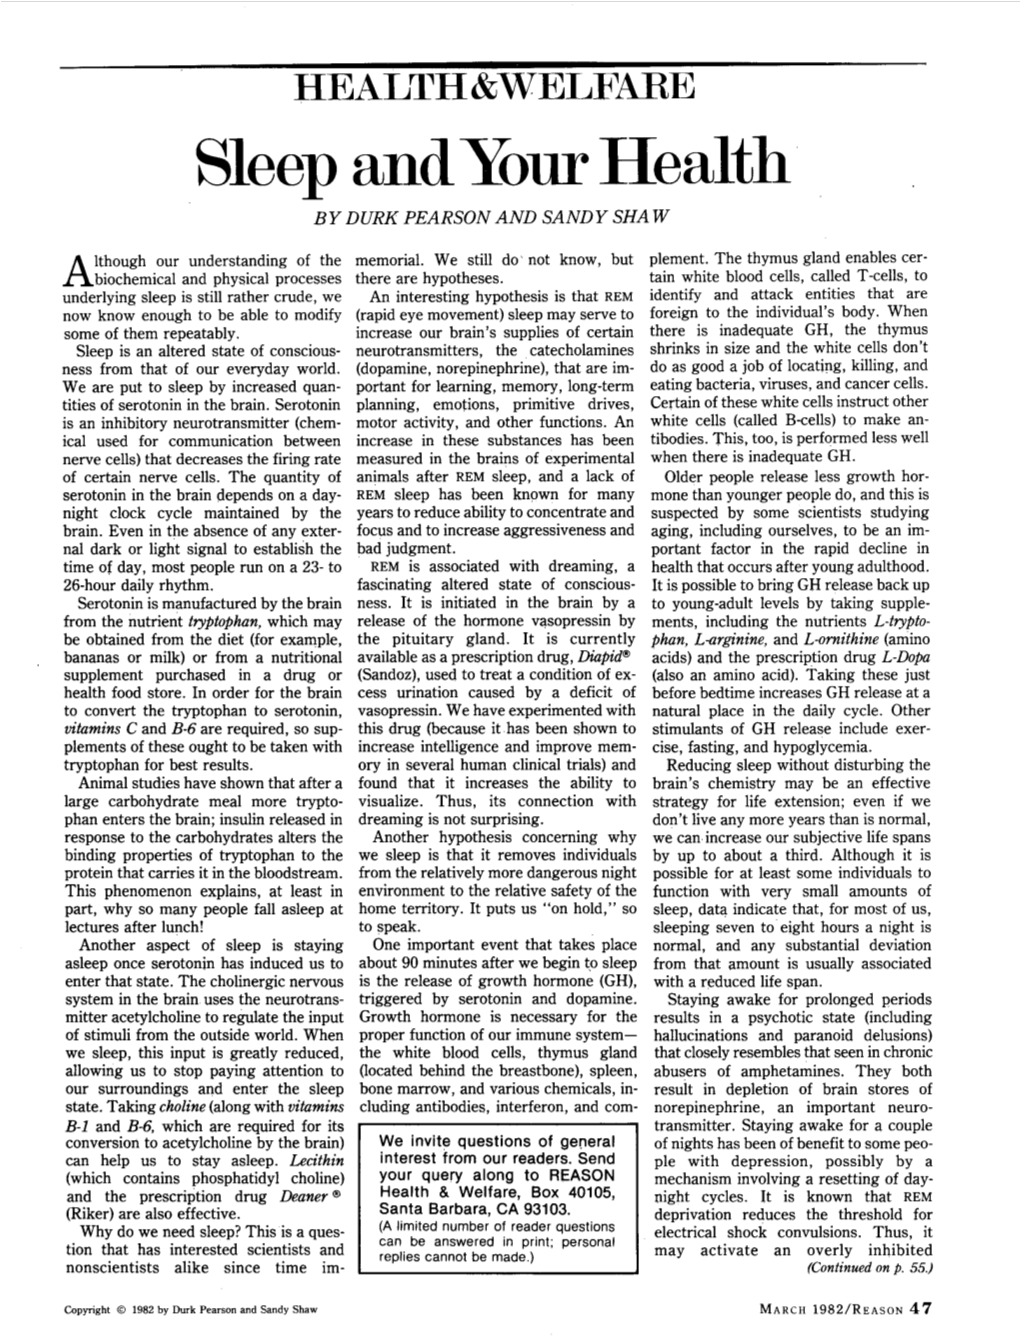 Sleep Andyour Health by DURK PEARSON and SANDY SHAW